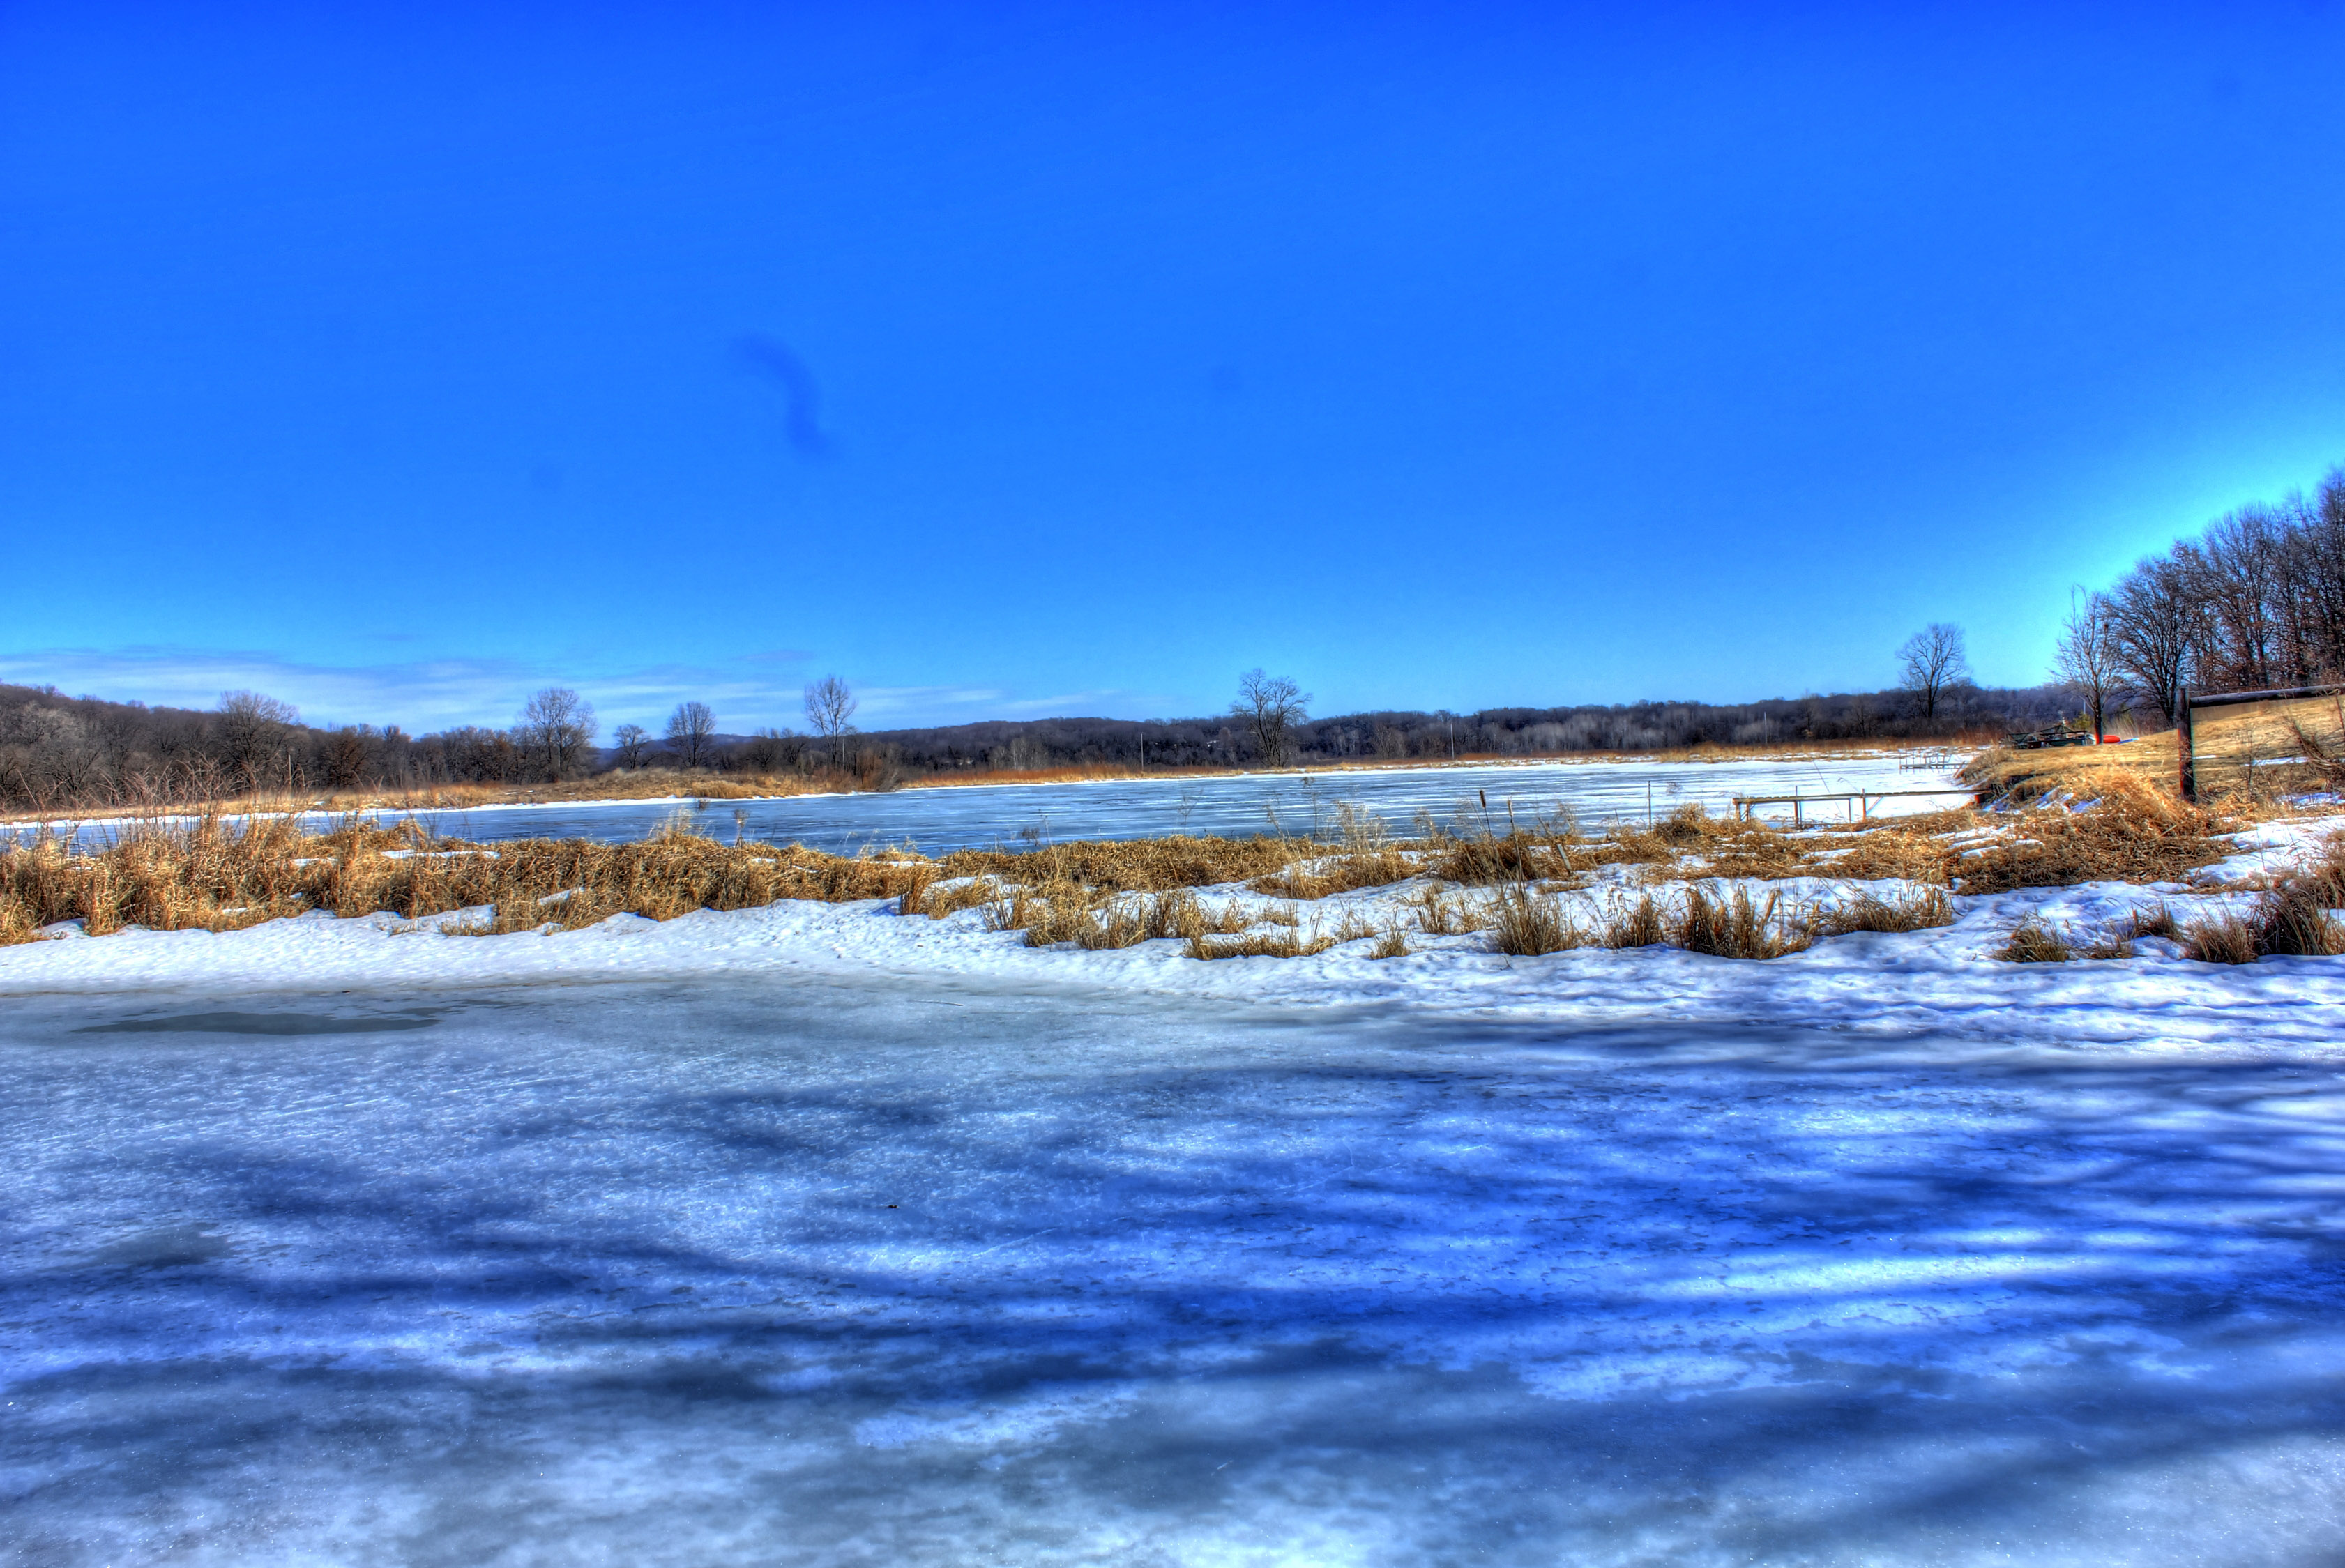 Frozen Pond on the Ice Age Trail, Wisconsin image - Free stock photo ...